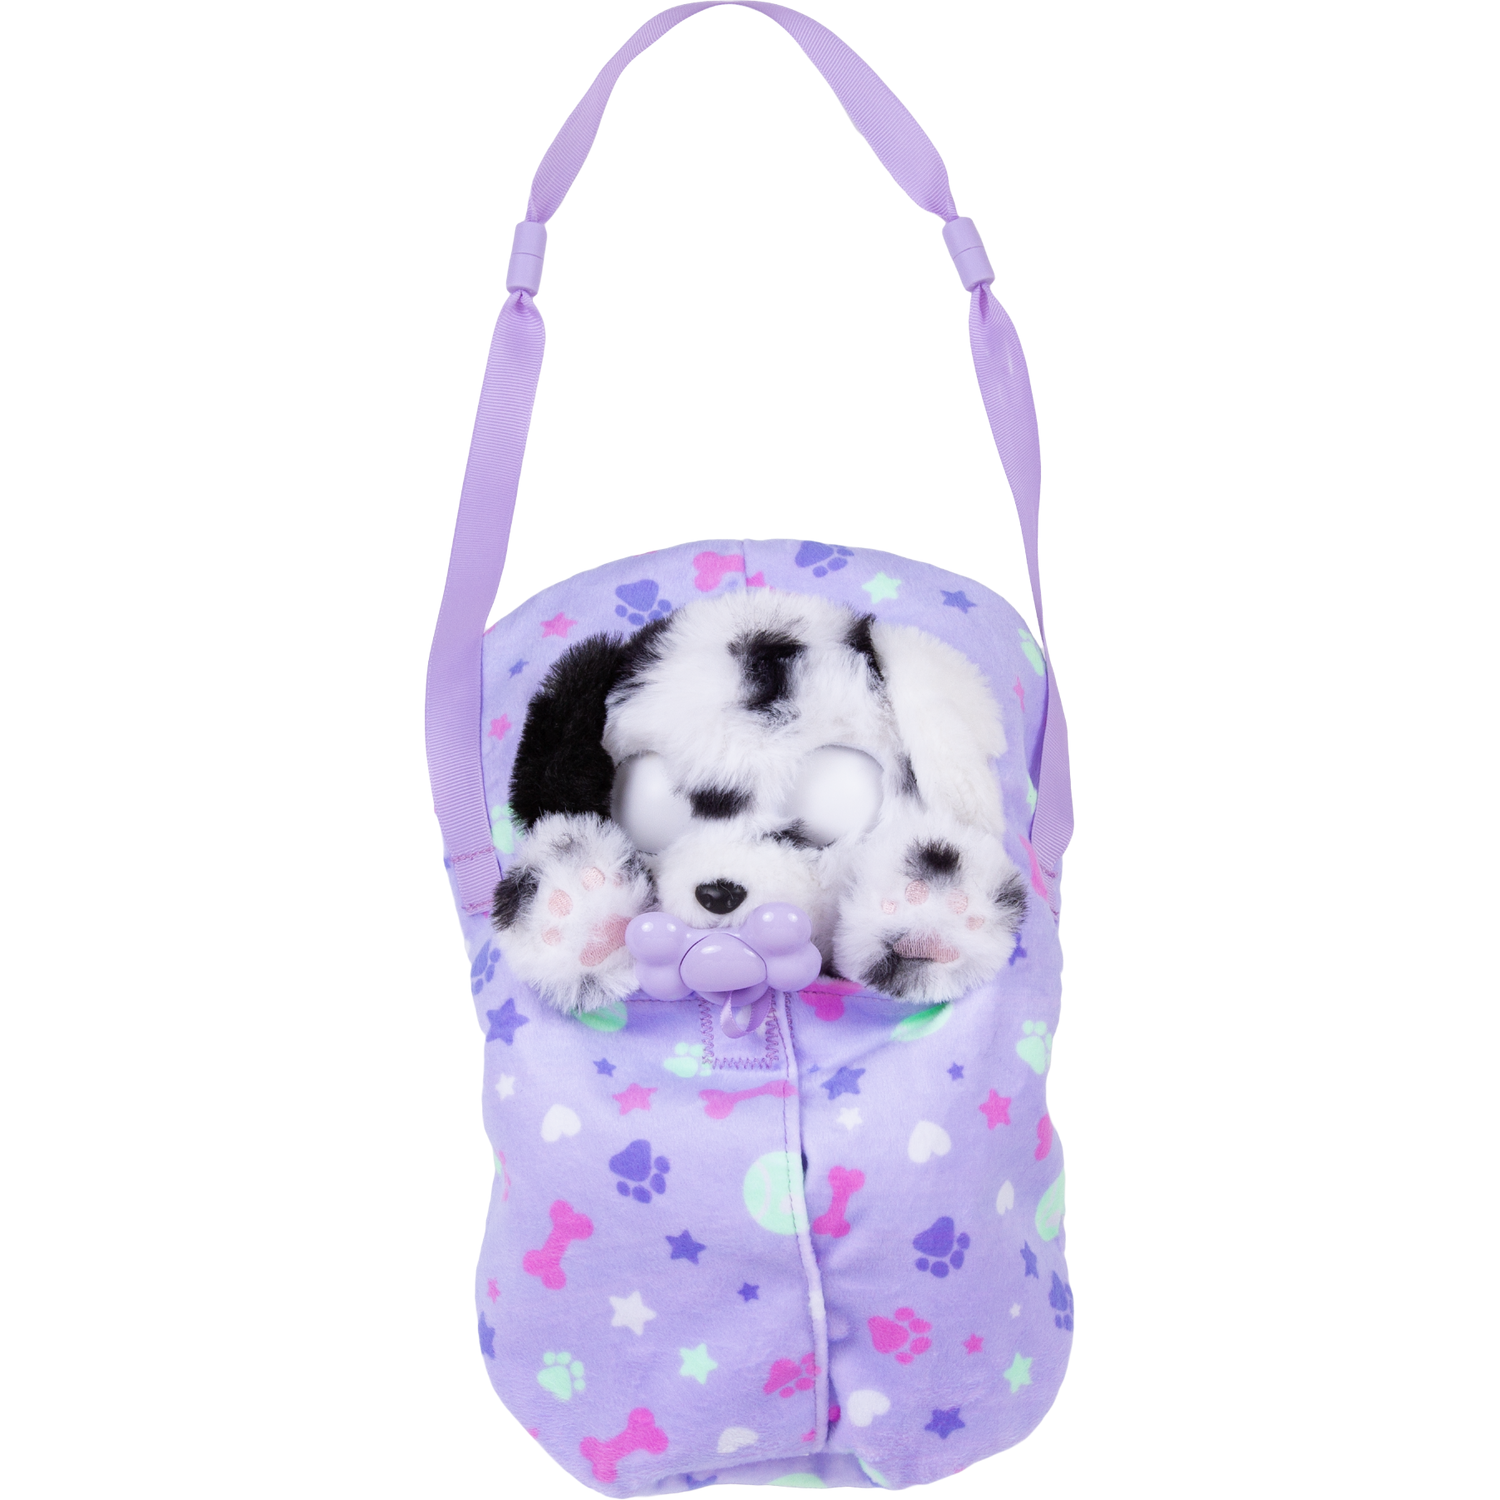 Baby Paws Purple Dalmatian Soft Toy Image 4